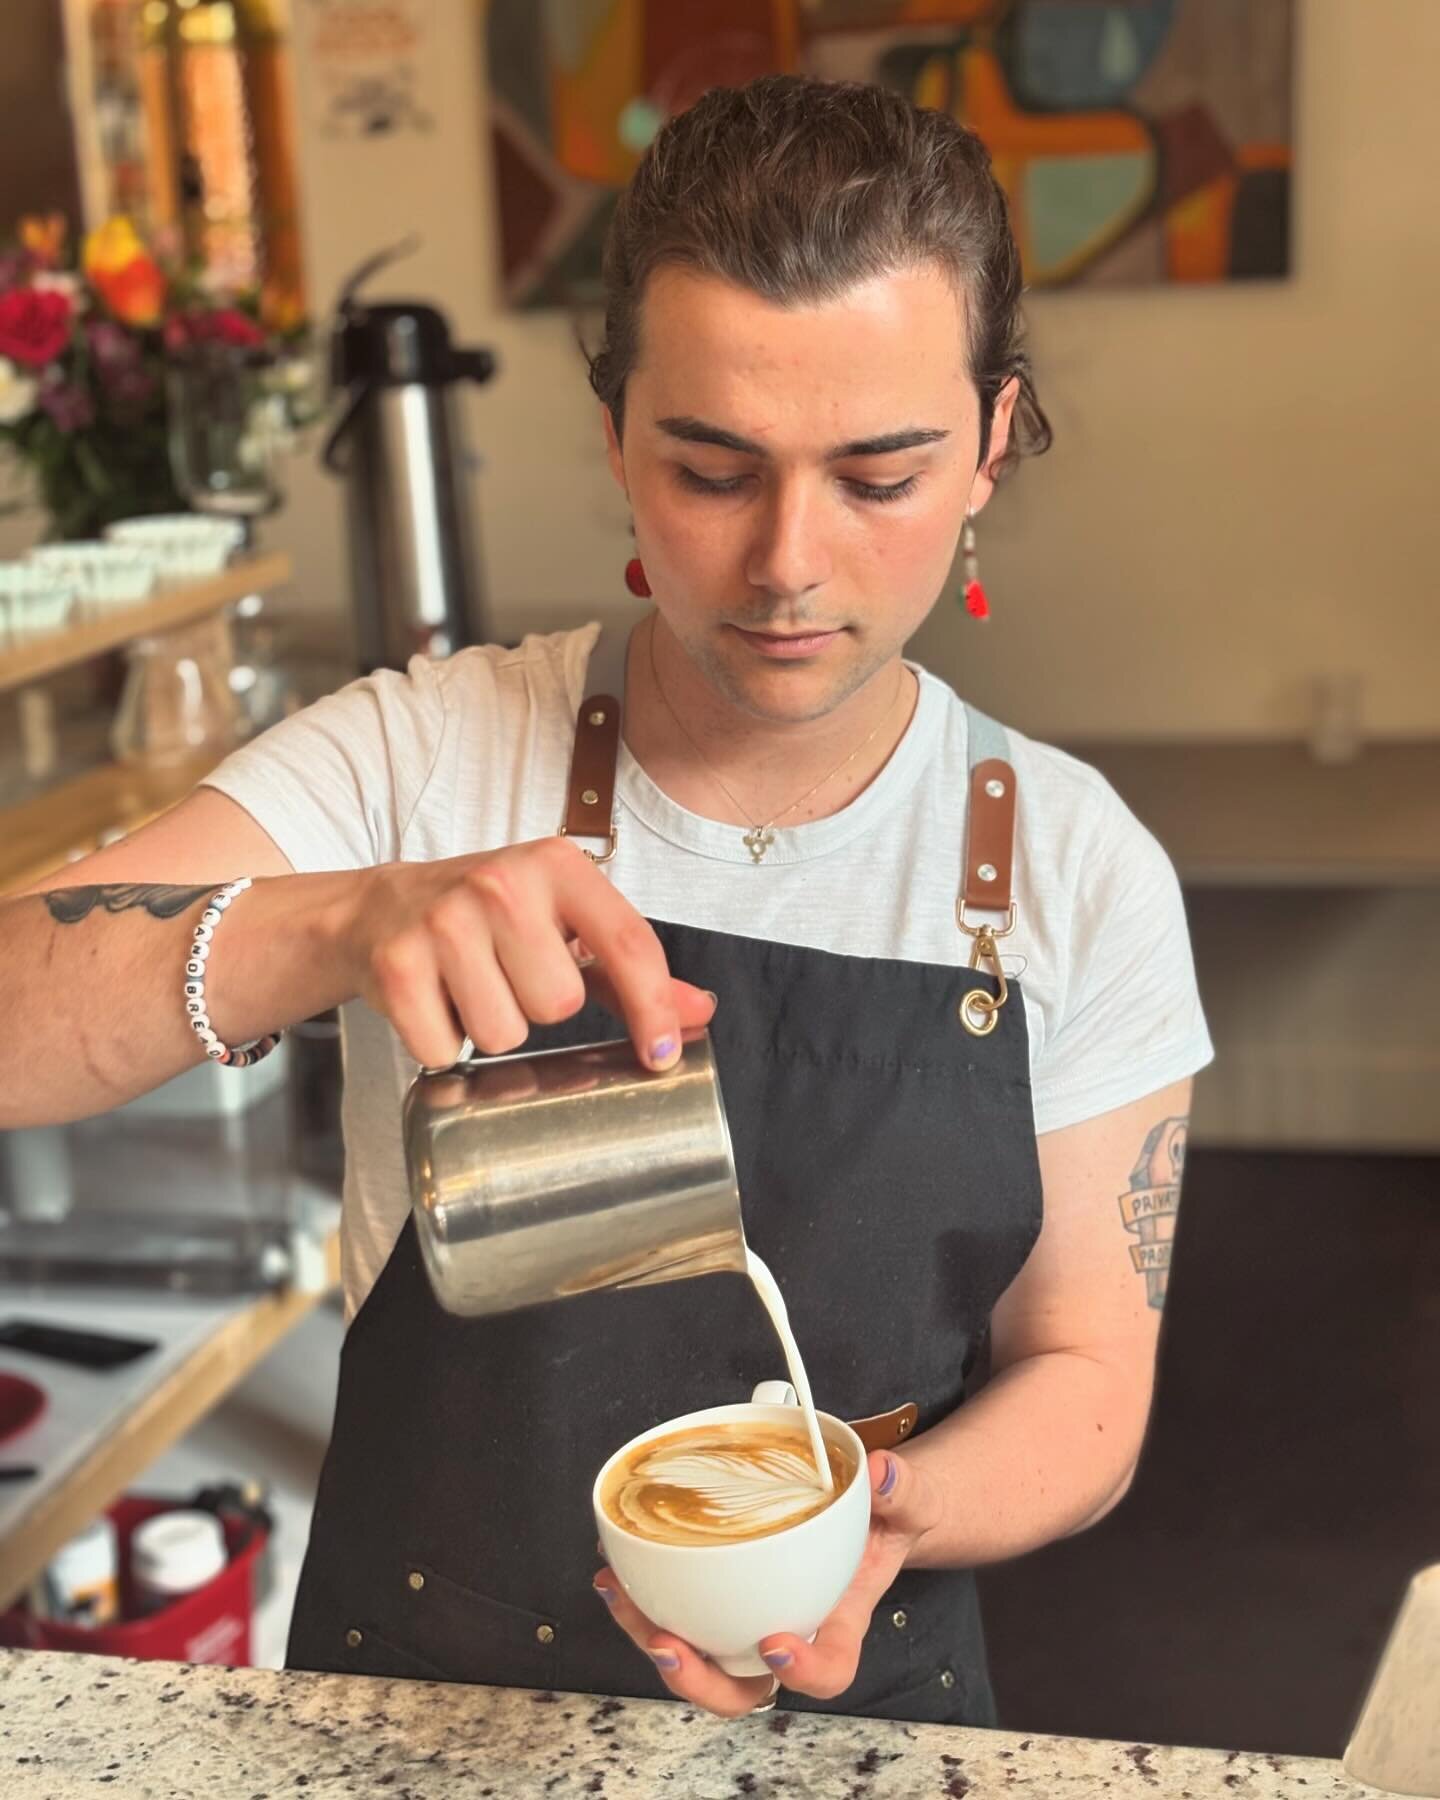 *Spotlight on Charlie*
Everyone come and say hello to Charlie, one of our lovely baristas here at Alla Prima. In case you weren&rsquo;t already aware, not only is Charlie incredibly talented at all things coffee, but is also an incredible baker, whip